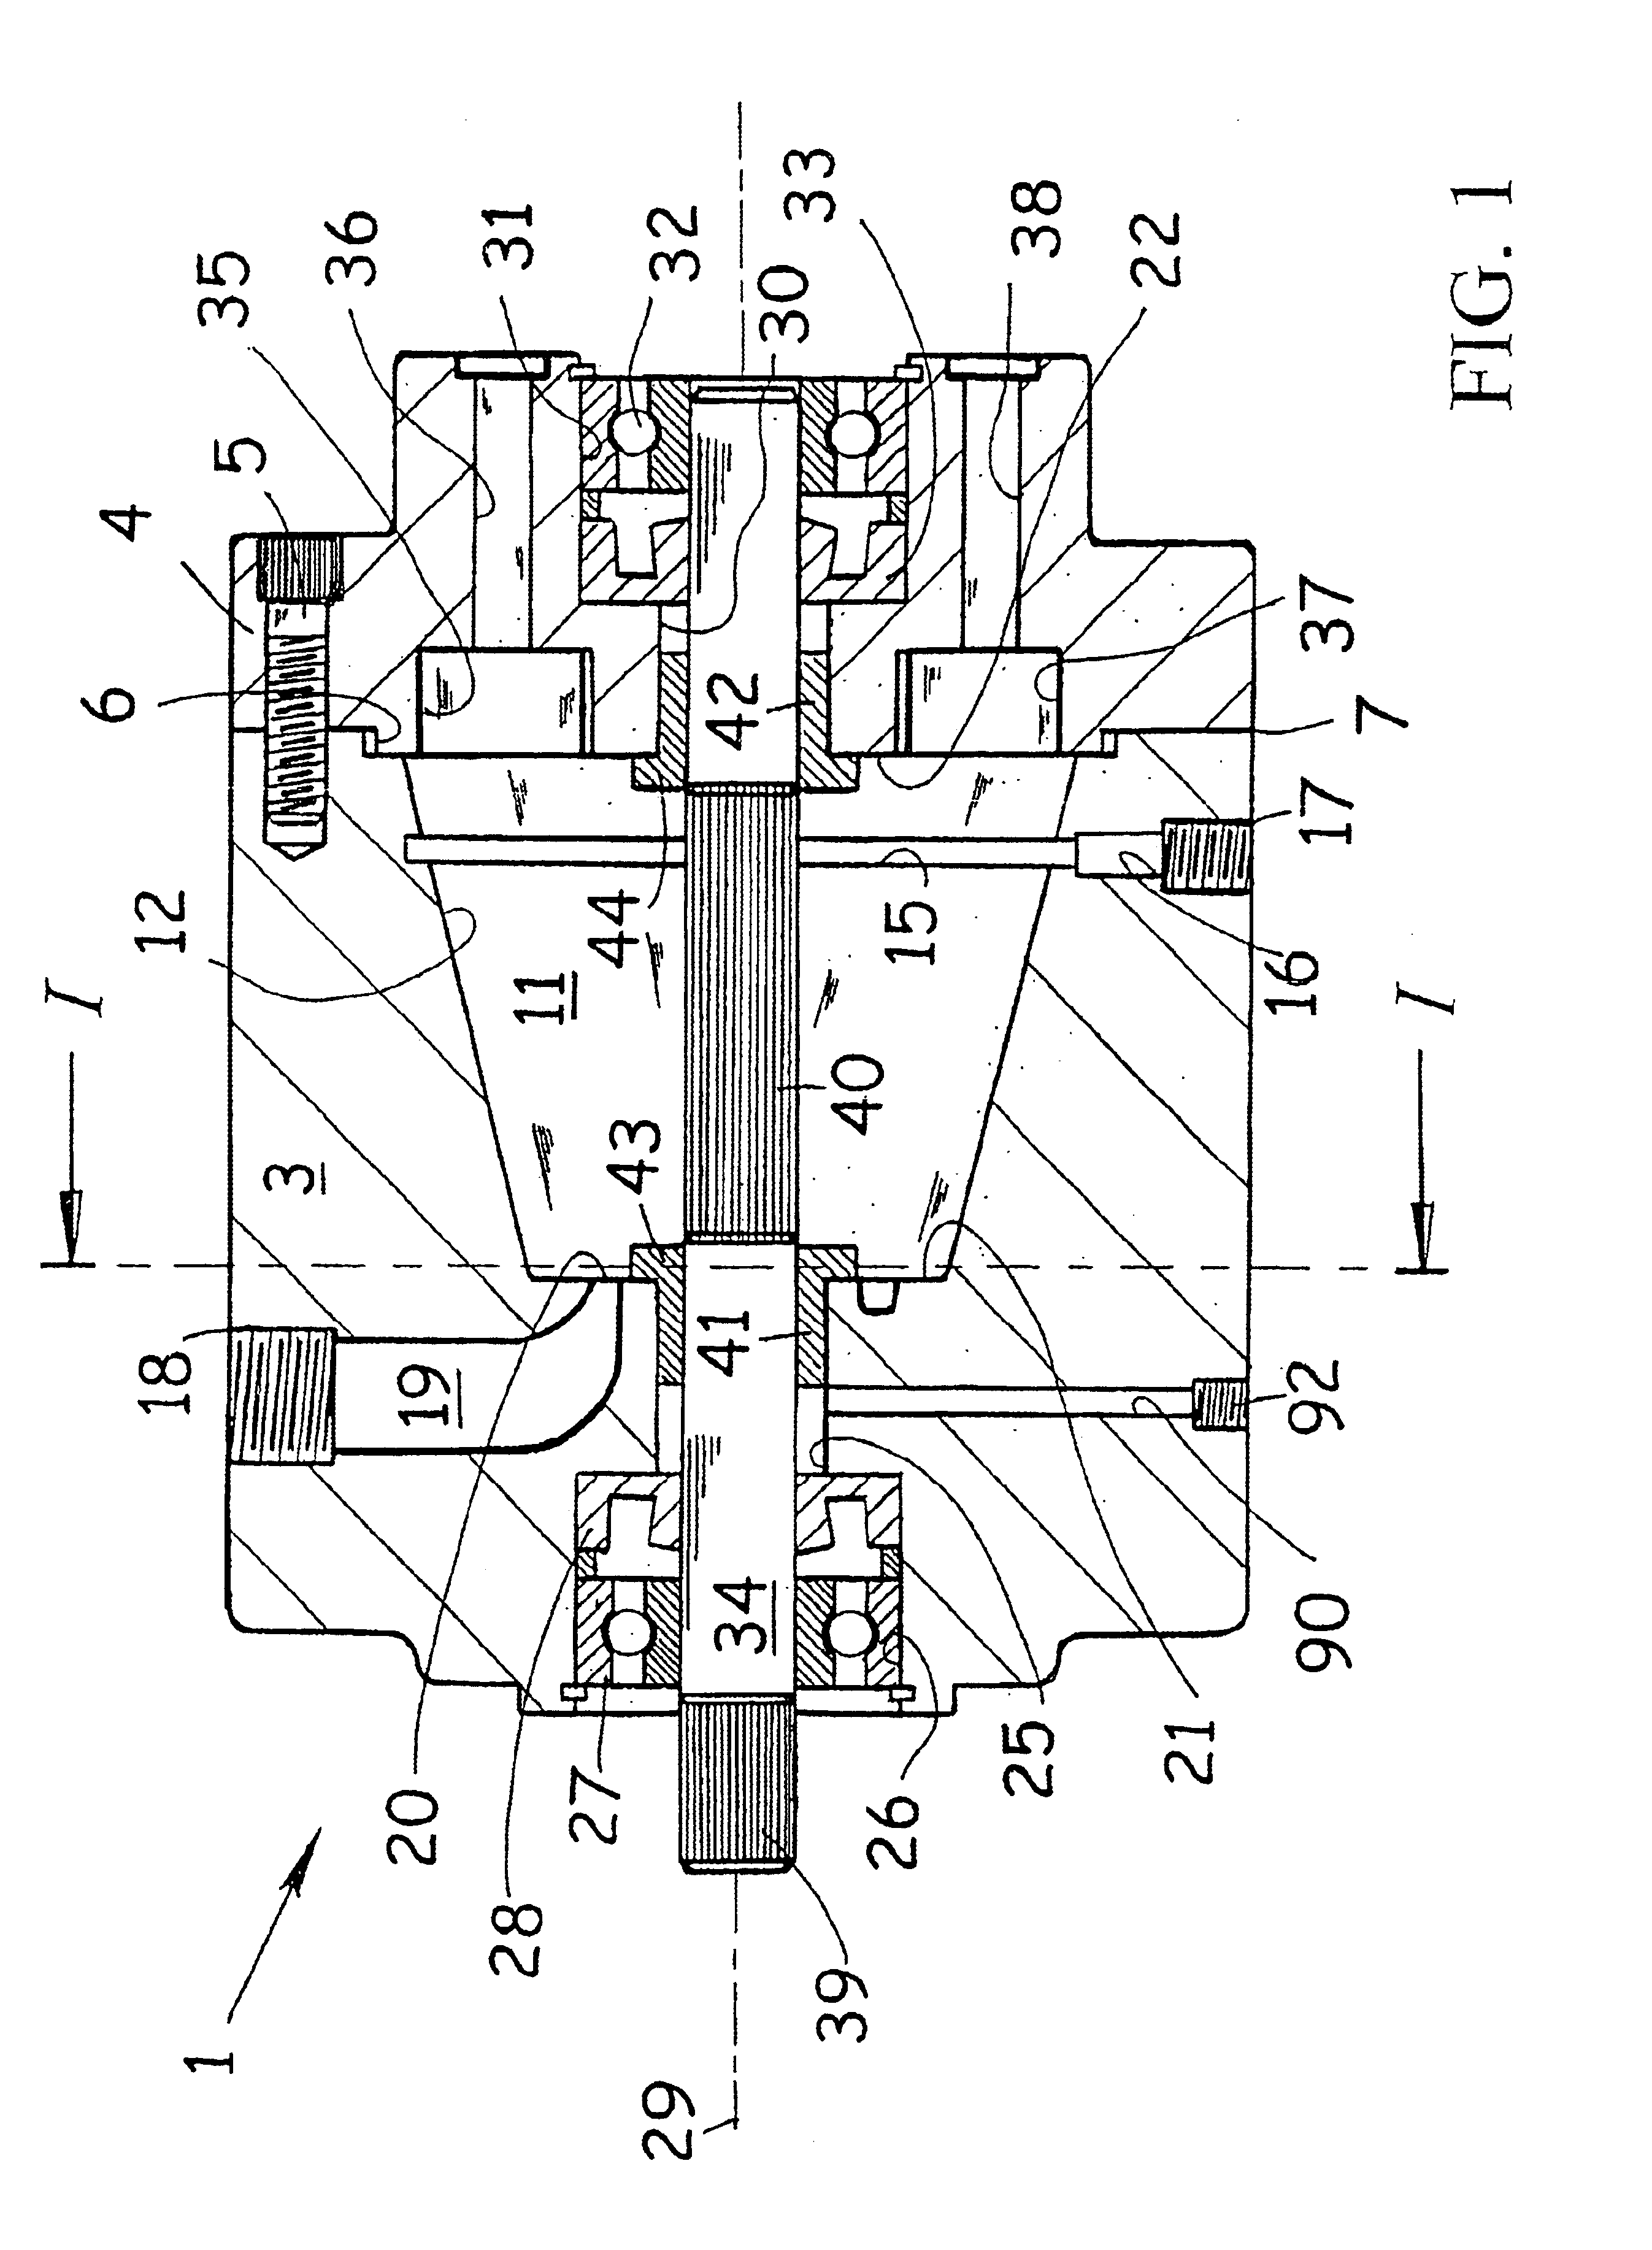 Apparatus for heating fluids